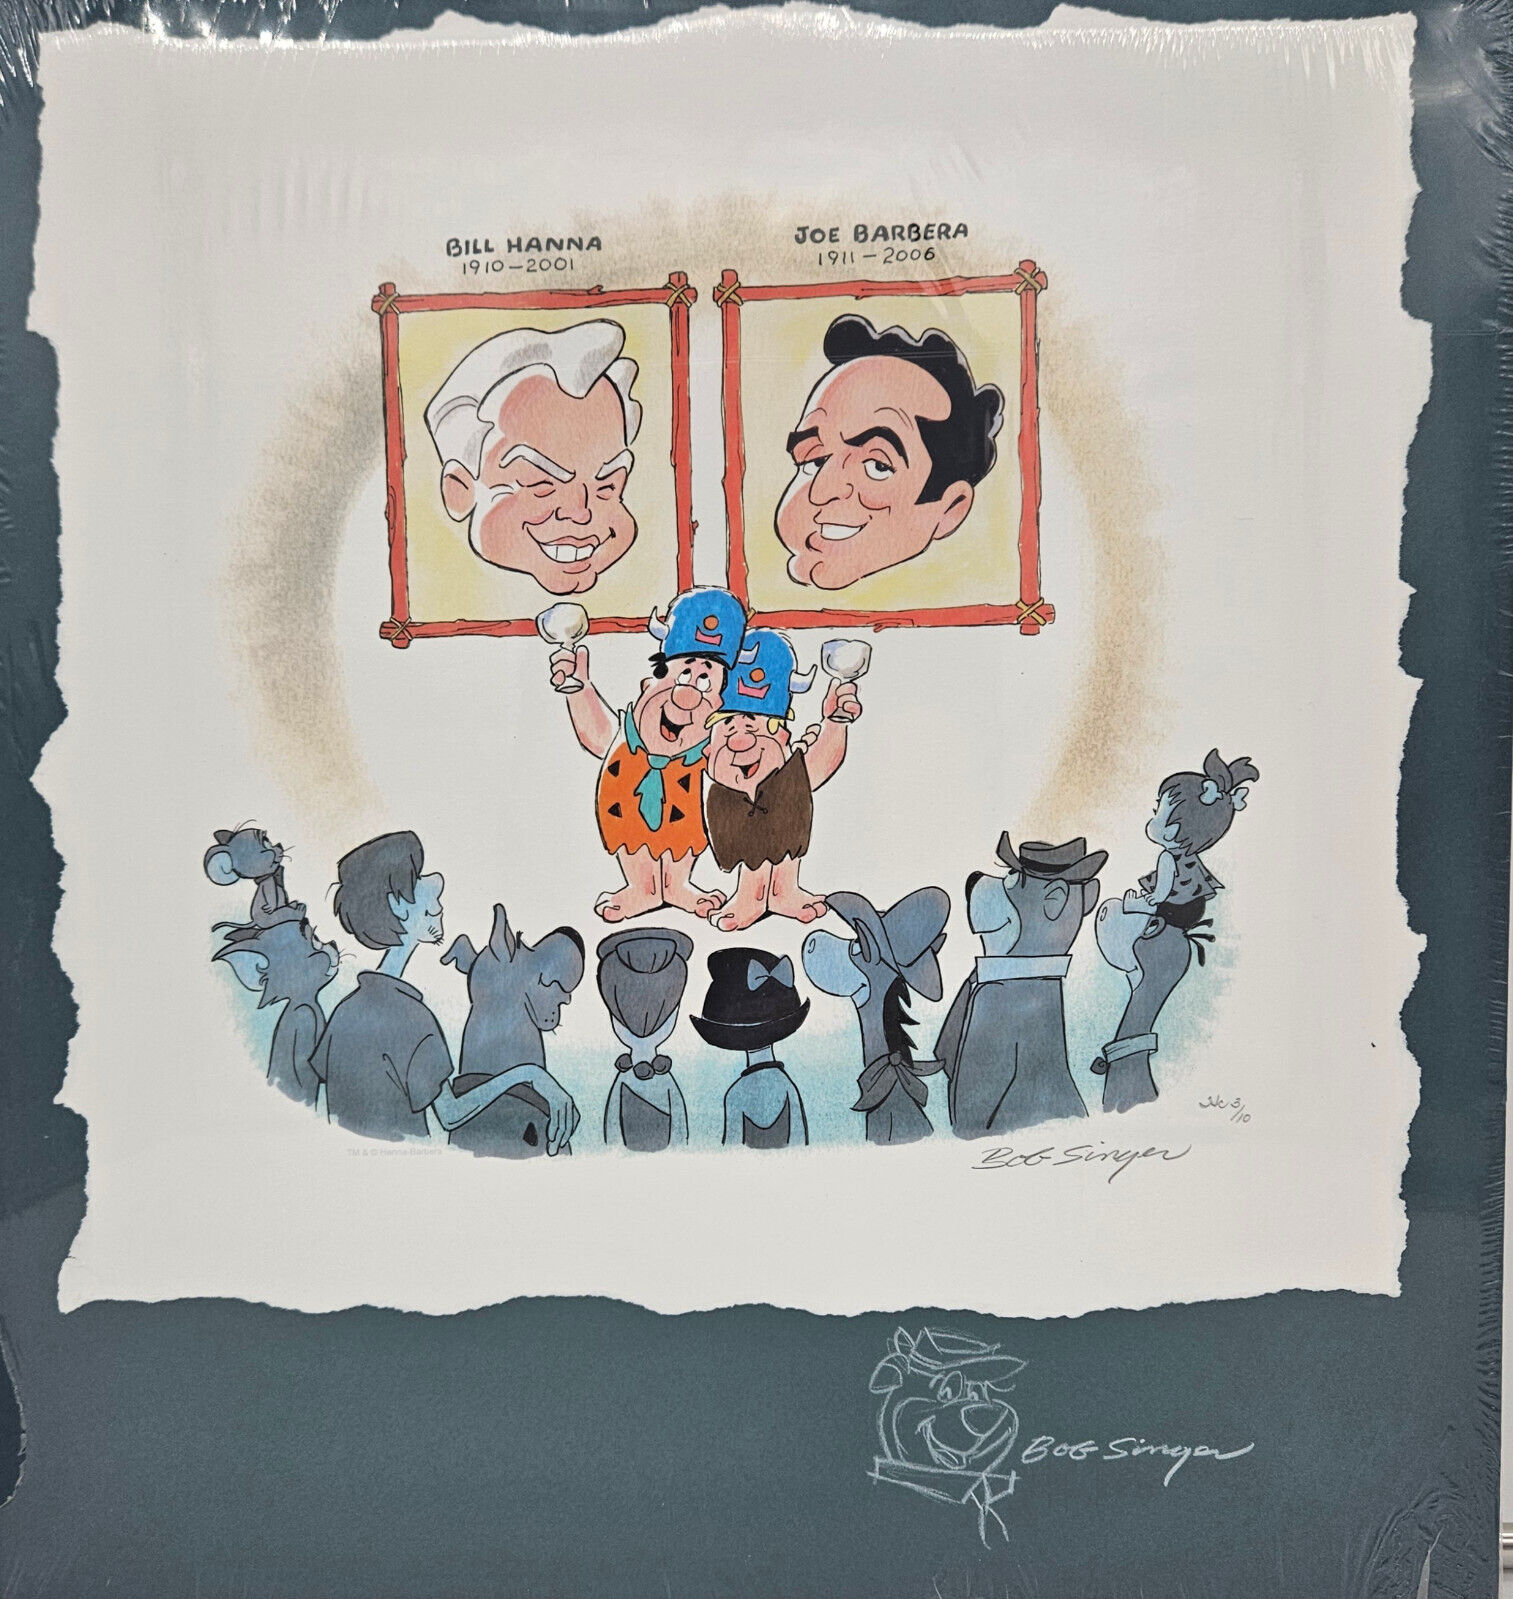 Bill Hanna/Joe Barbera Tribute Giclee On Paper Signed+Remarked by Bob Singer 